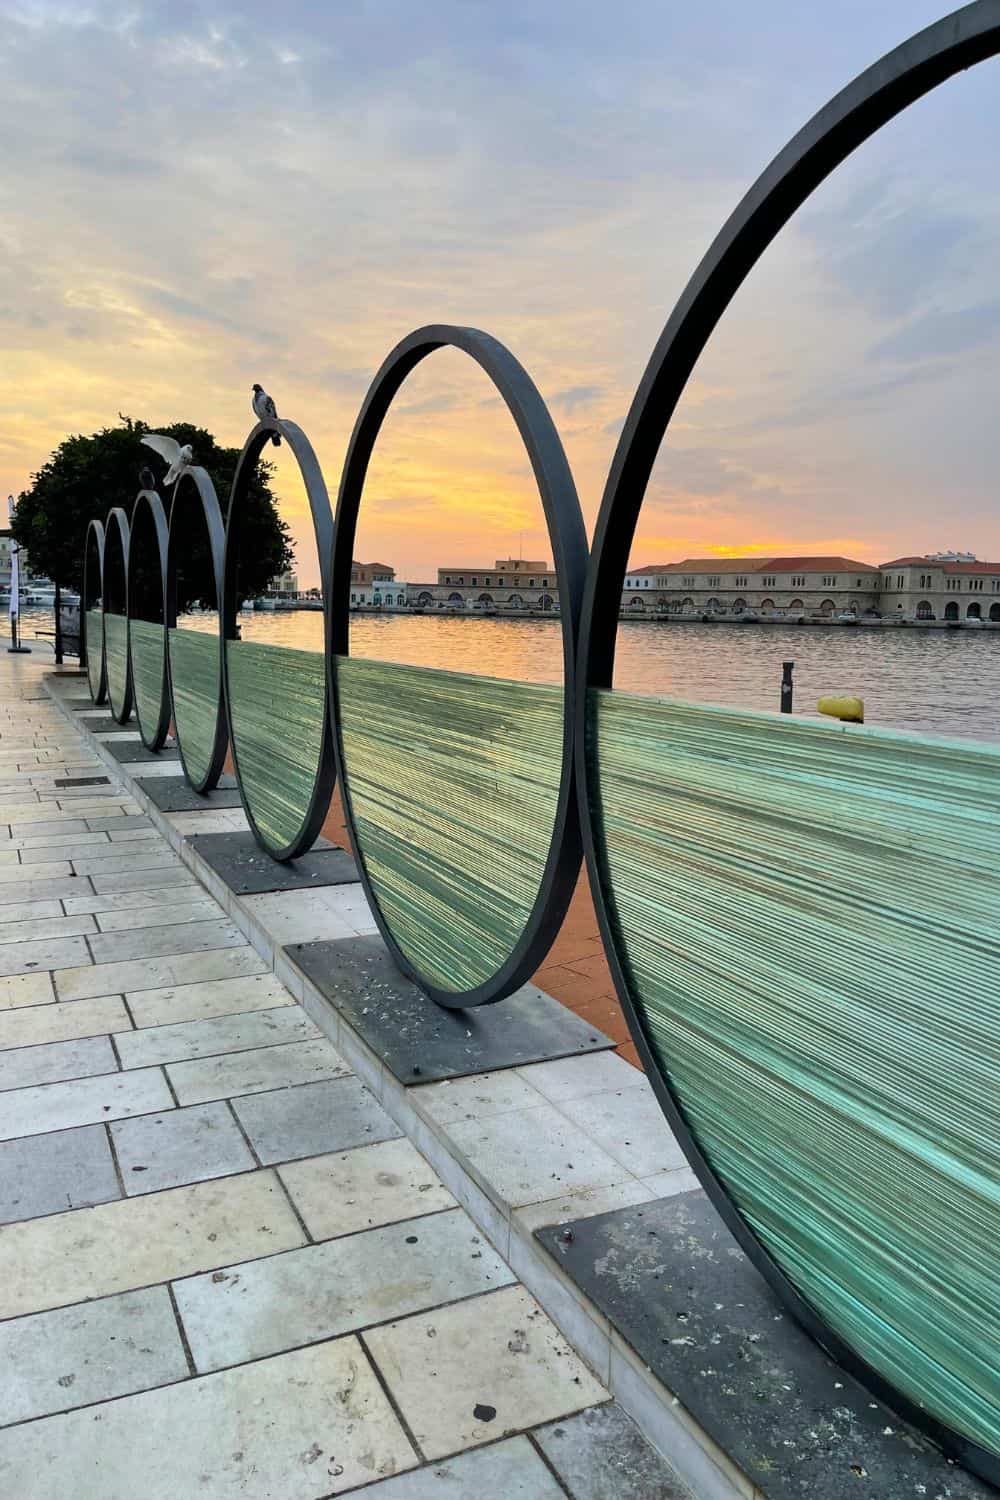 Sunset view at a waterfront in Syros with artistic urban design featuring a series of metal arches over a curved glass bench. The bench reflects the warm tones of the sky at dusk, while seagulls perch atop the sleek, modern structure. In the distance, the silhouette of neoclassical buildings lines the calm harbor, contributing to a peaceful and picturesque evening atmosphere.